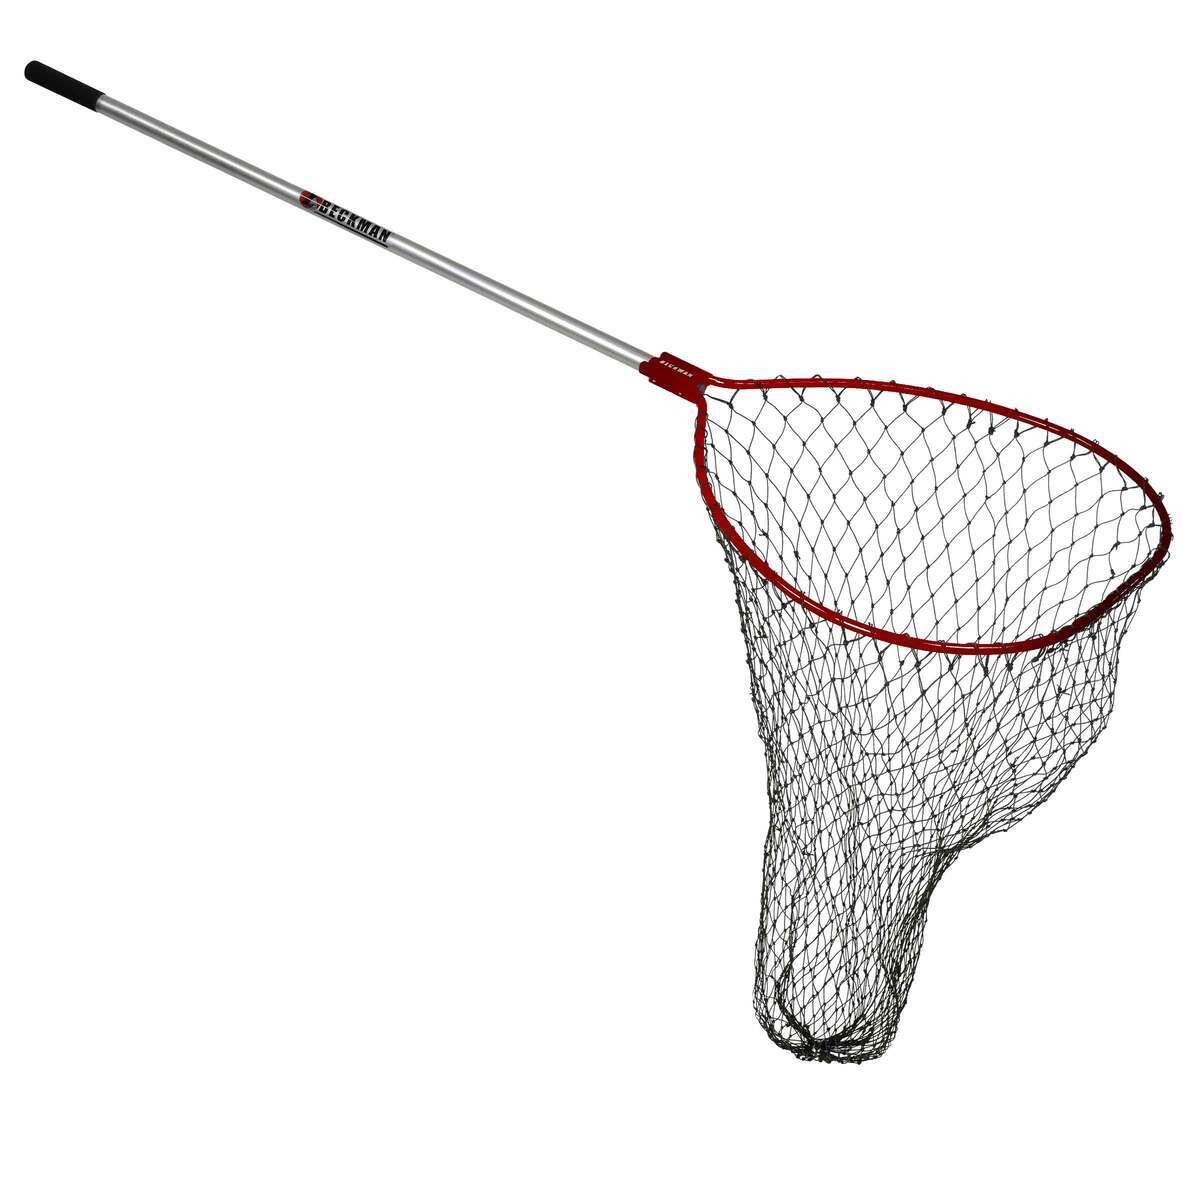 Beckman Fixed Handle/Coated Nylon Landing Net - Red/Silver, 31in W